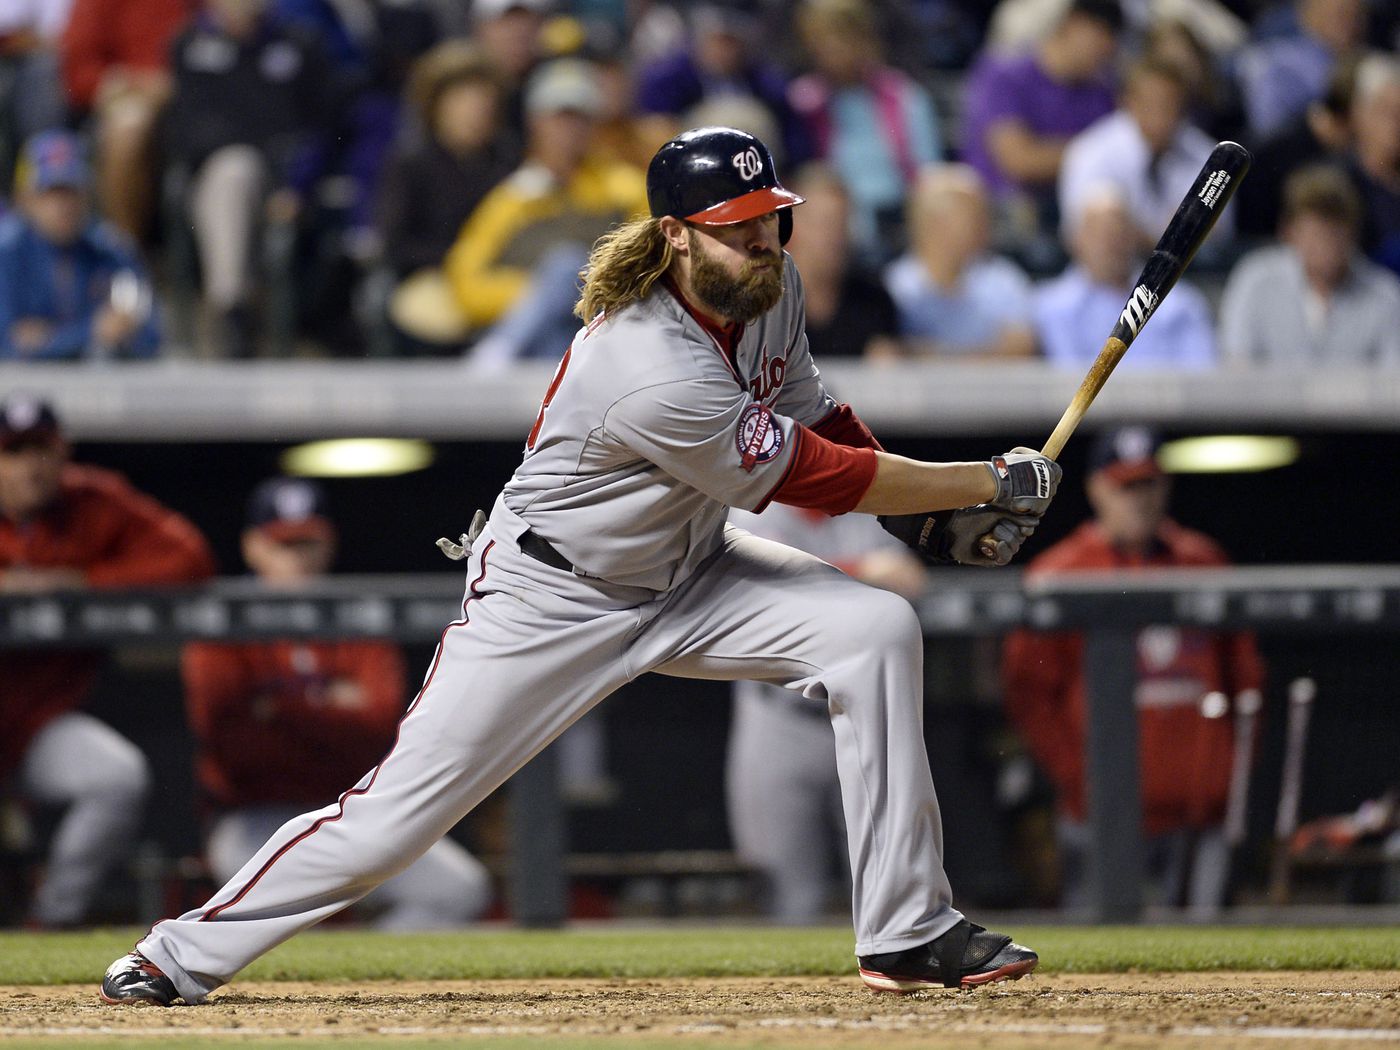 Jayson Werth Says He's 'Done' with MLB Playing Career After 15